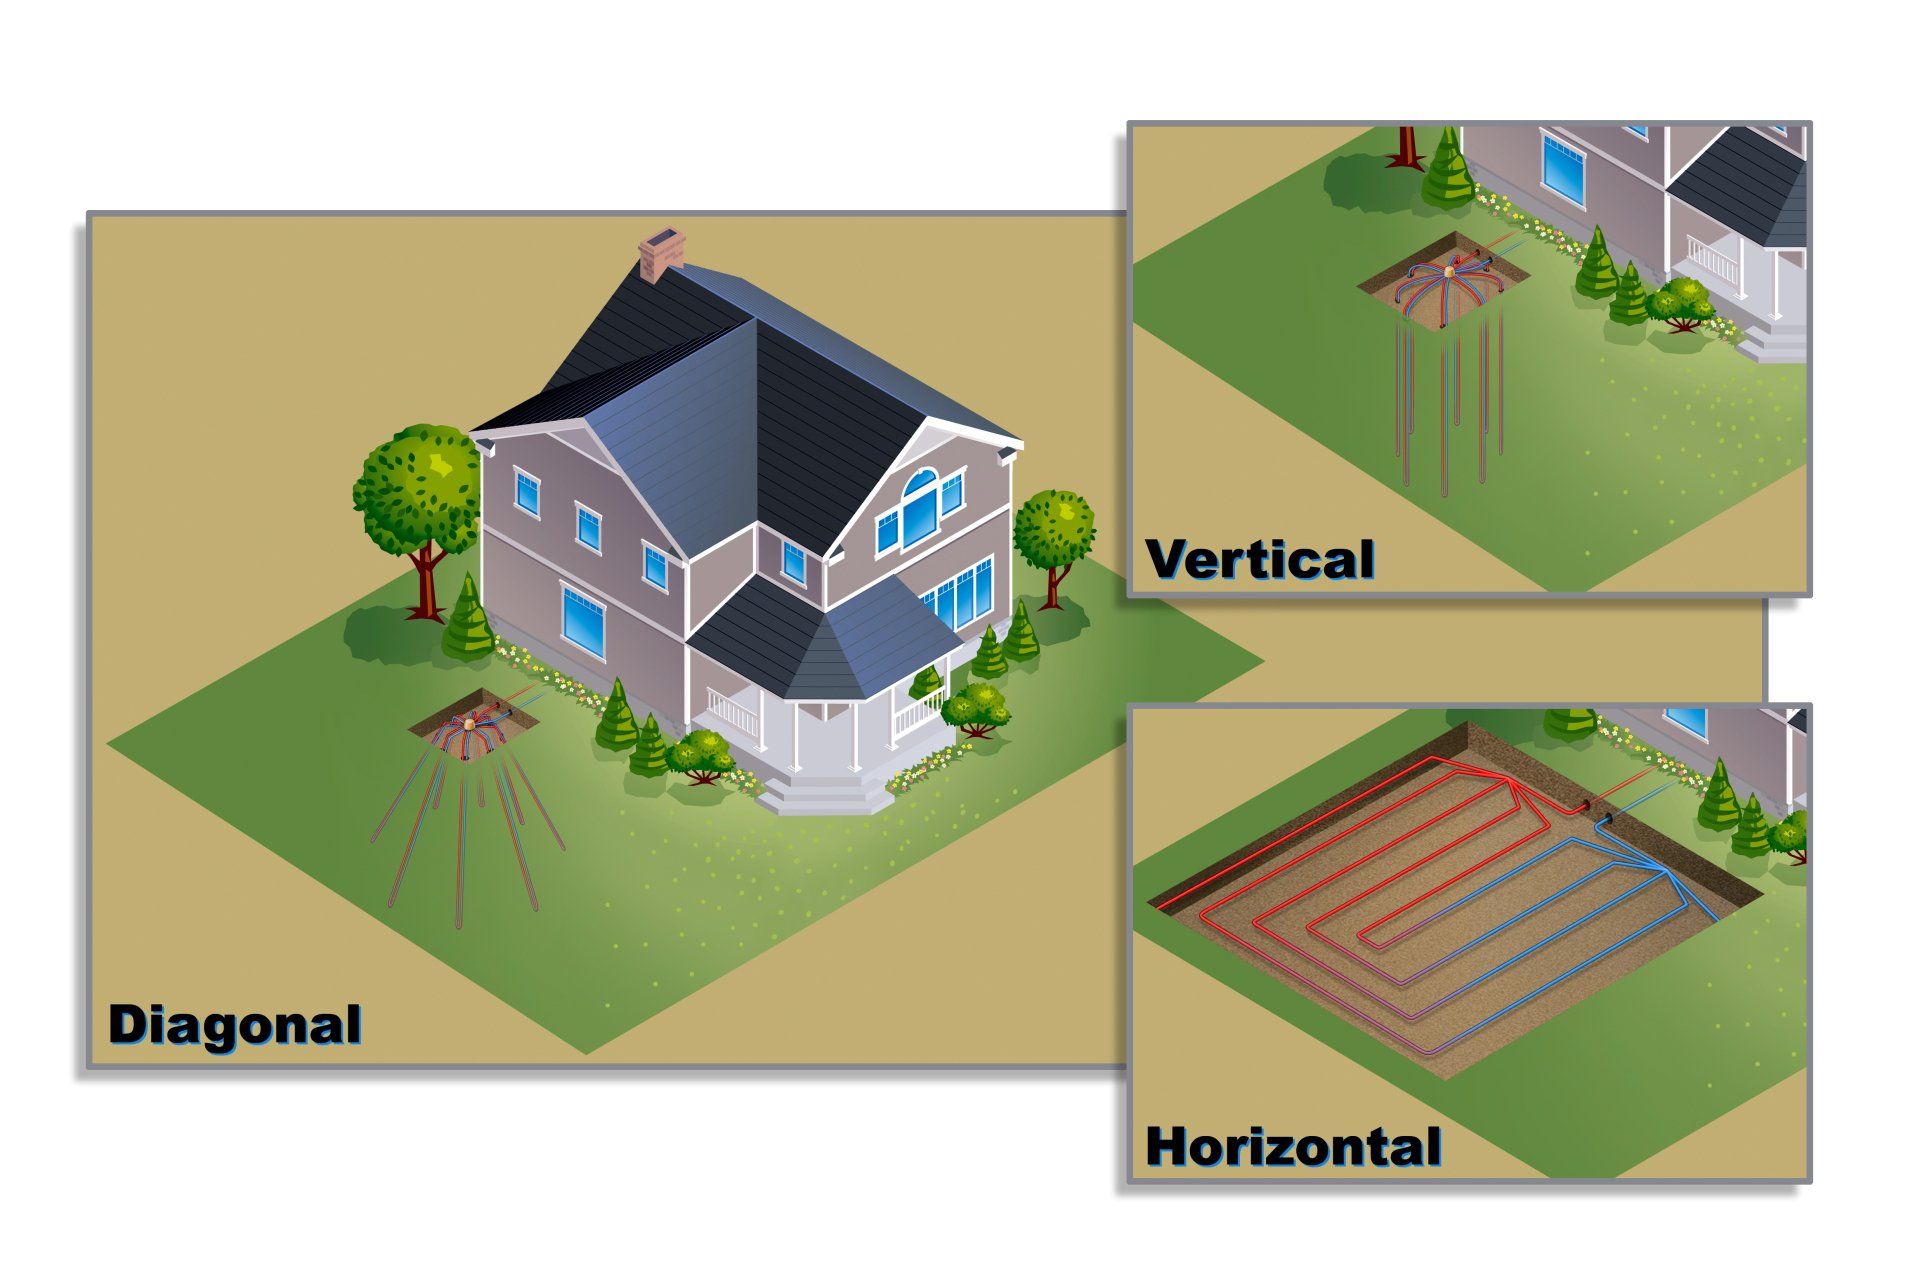 Show-Me Heating & Air Conditioning, Inc offers geothermal systems